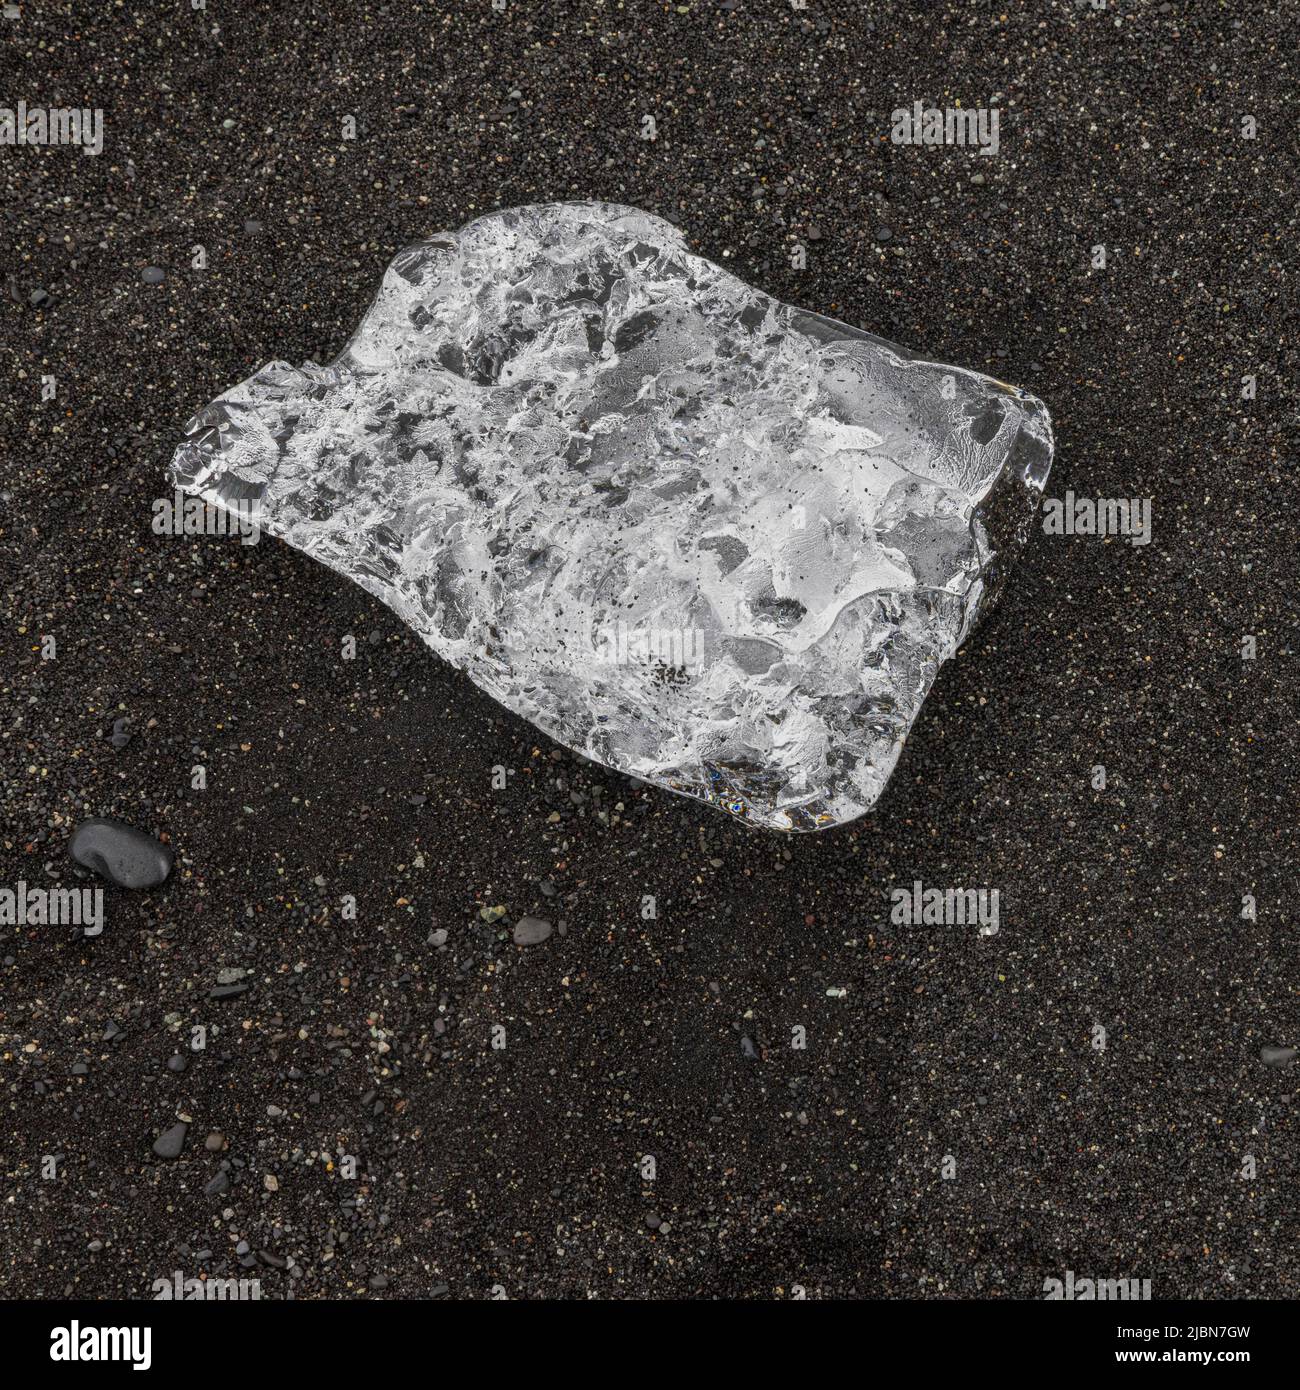 The remains of ice floes on the shoreline at Diamond Beach Iceland Stock Photo